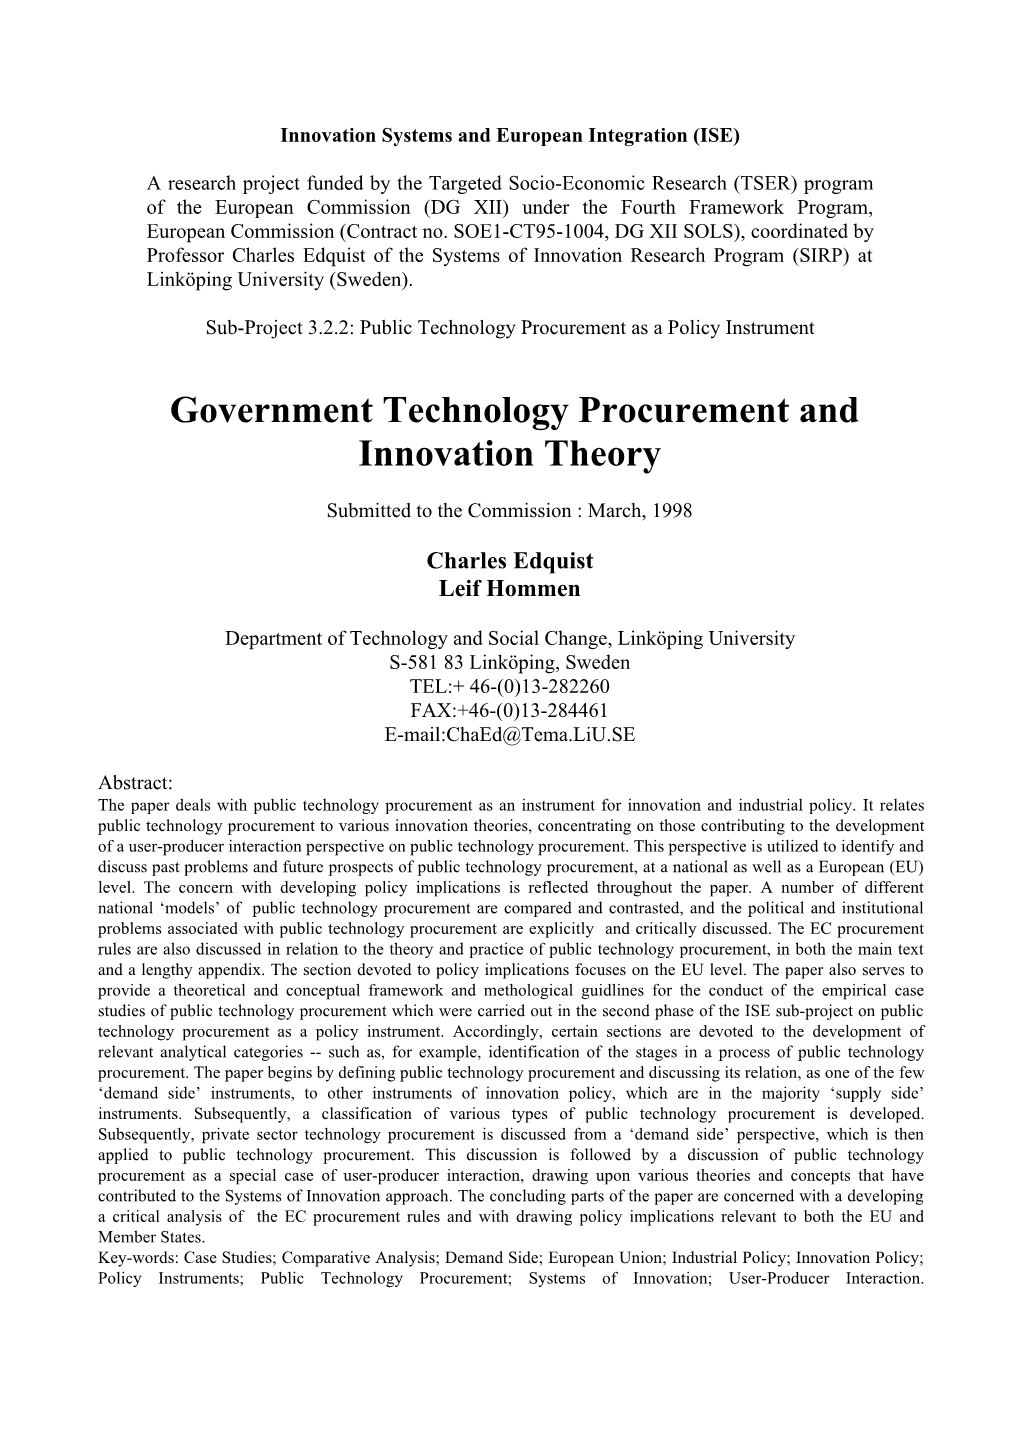 Government Technology Procurement and Innovation Theory